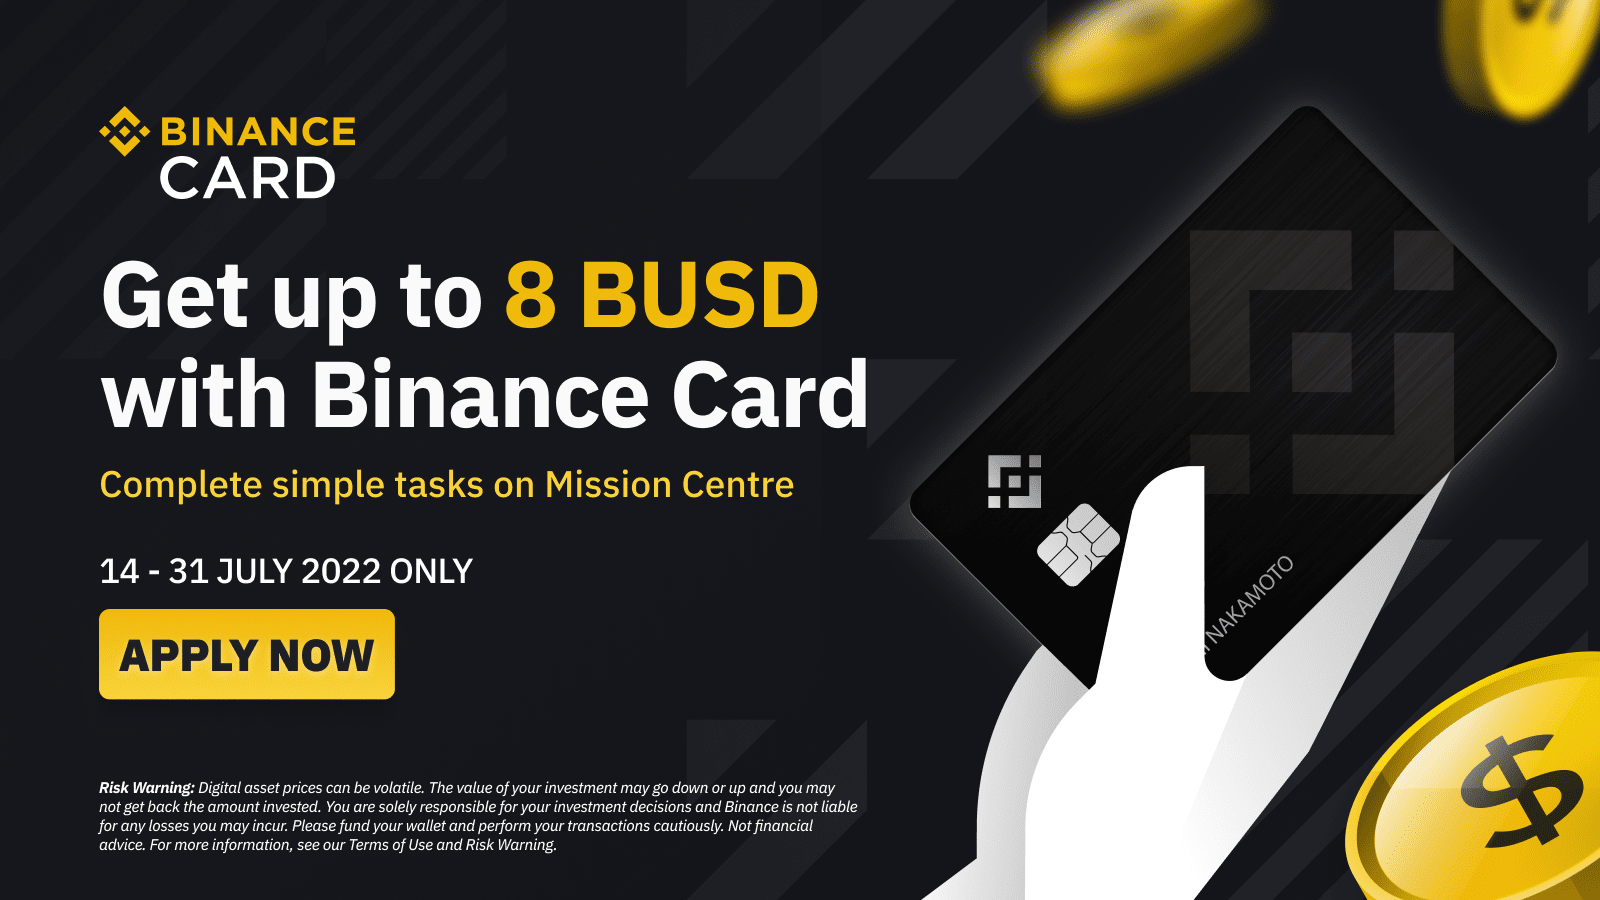 Get Up to 8 BUSD by Completing Missions with Your Binance Card!